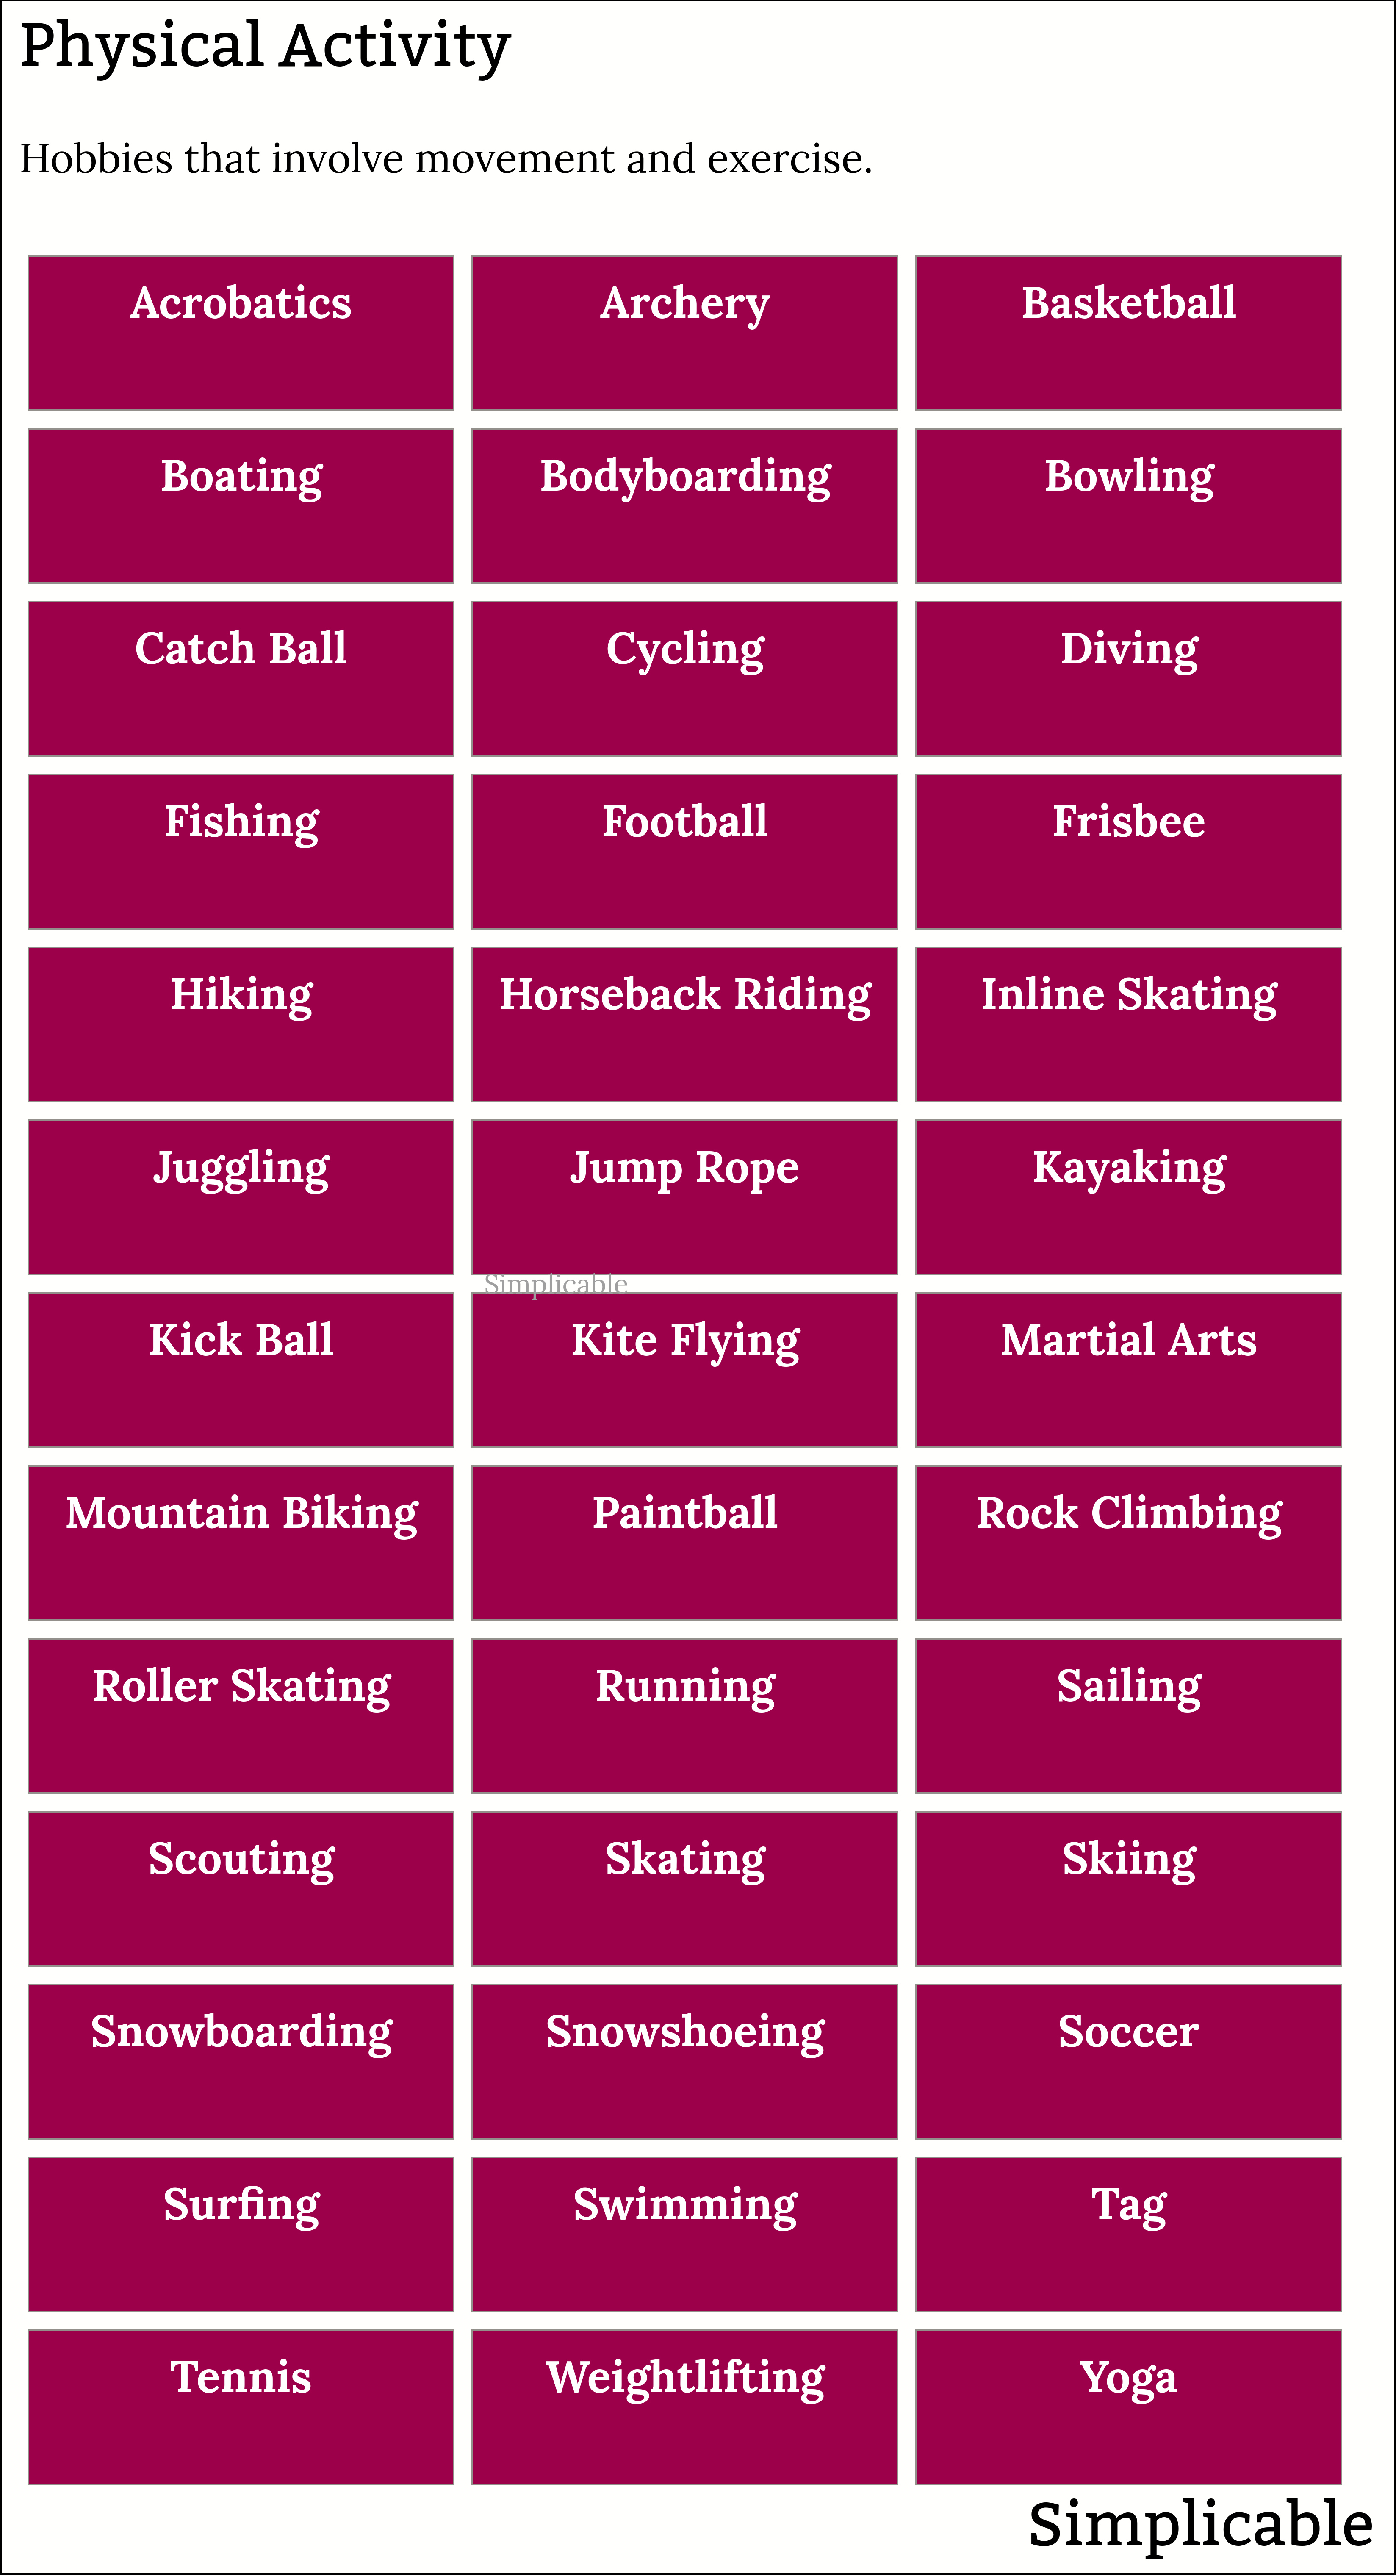 examples of physical activity hobbies